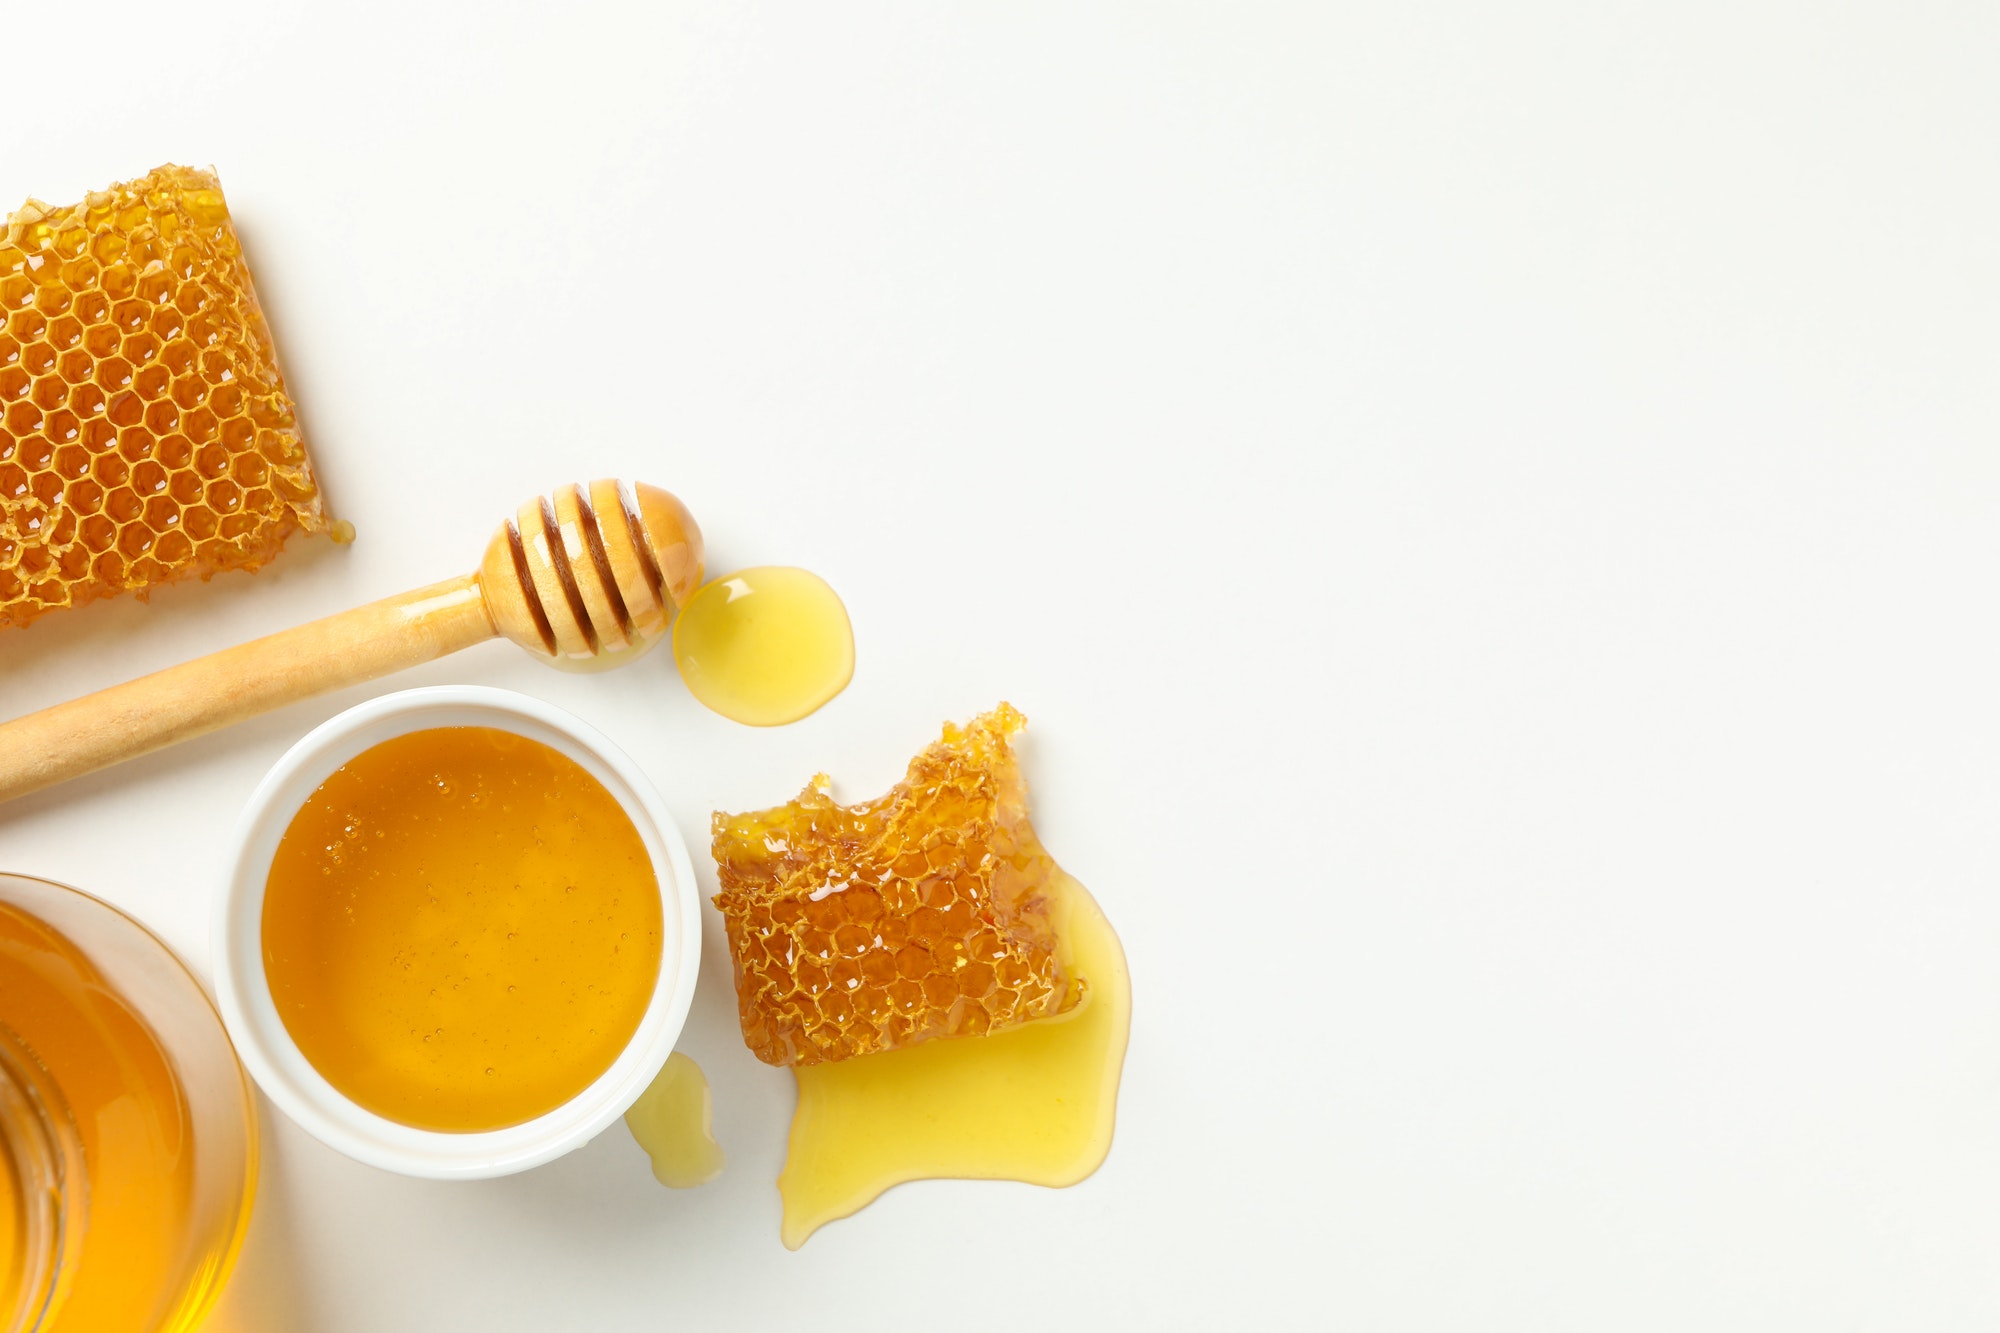 Bowl with honey, dipper and honeycombs on white background